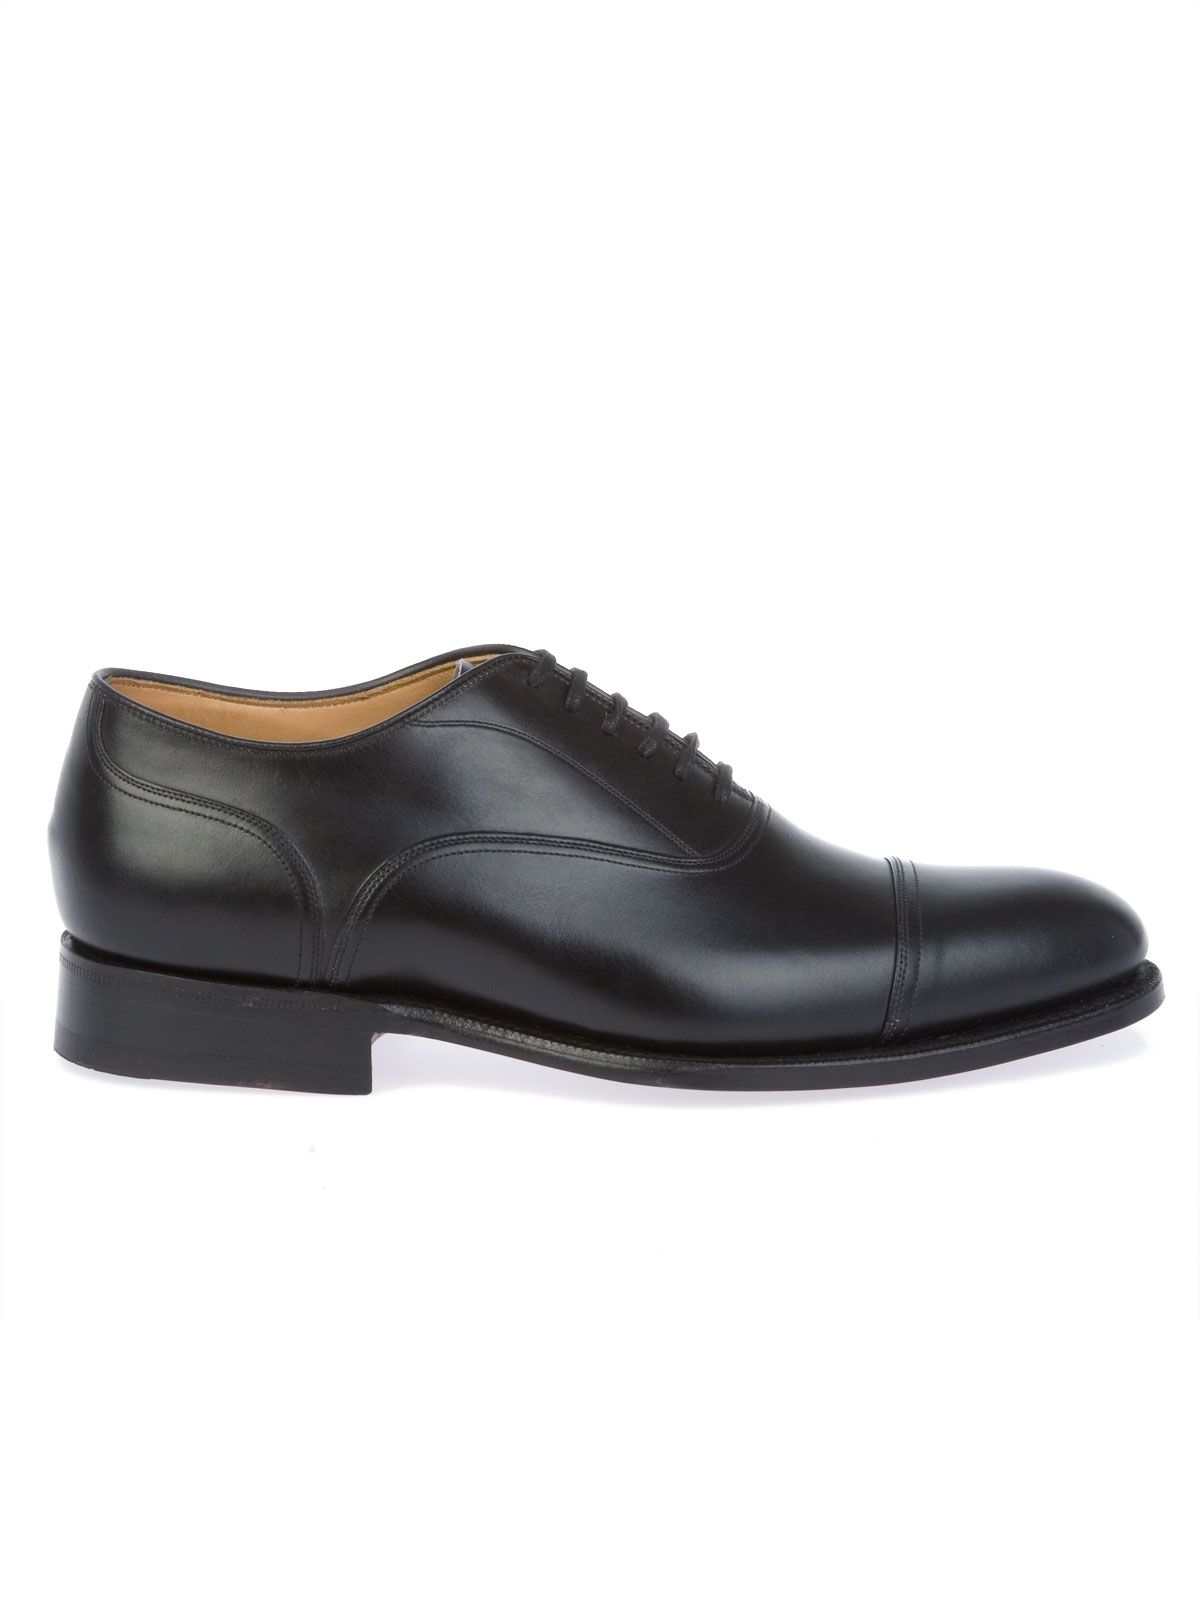 CHURCH'S MEN'S GOODRICKNEVADACALFBLACK BLACK LEATHER LACE-UP SHOES